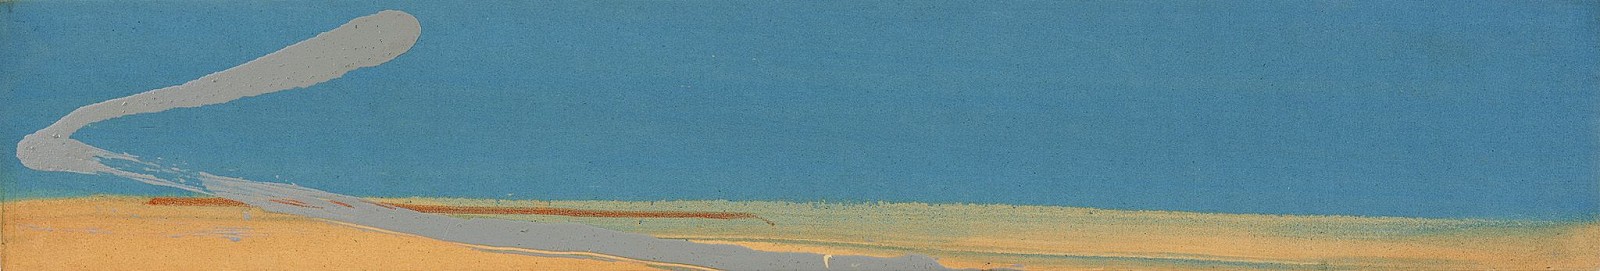 Larry Zox, Blue Check, c. 1981
Acrylic on canvas, 13 x 75 3/8 in. (33 x 191.4 cm)
ZOX-00165